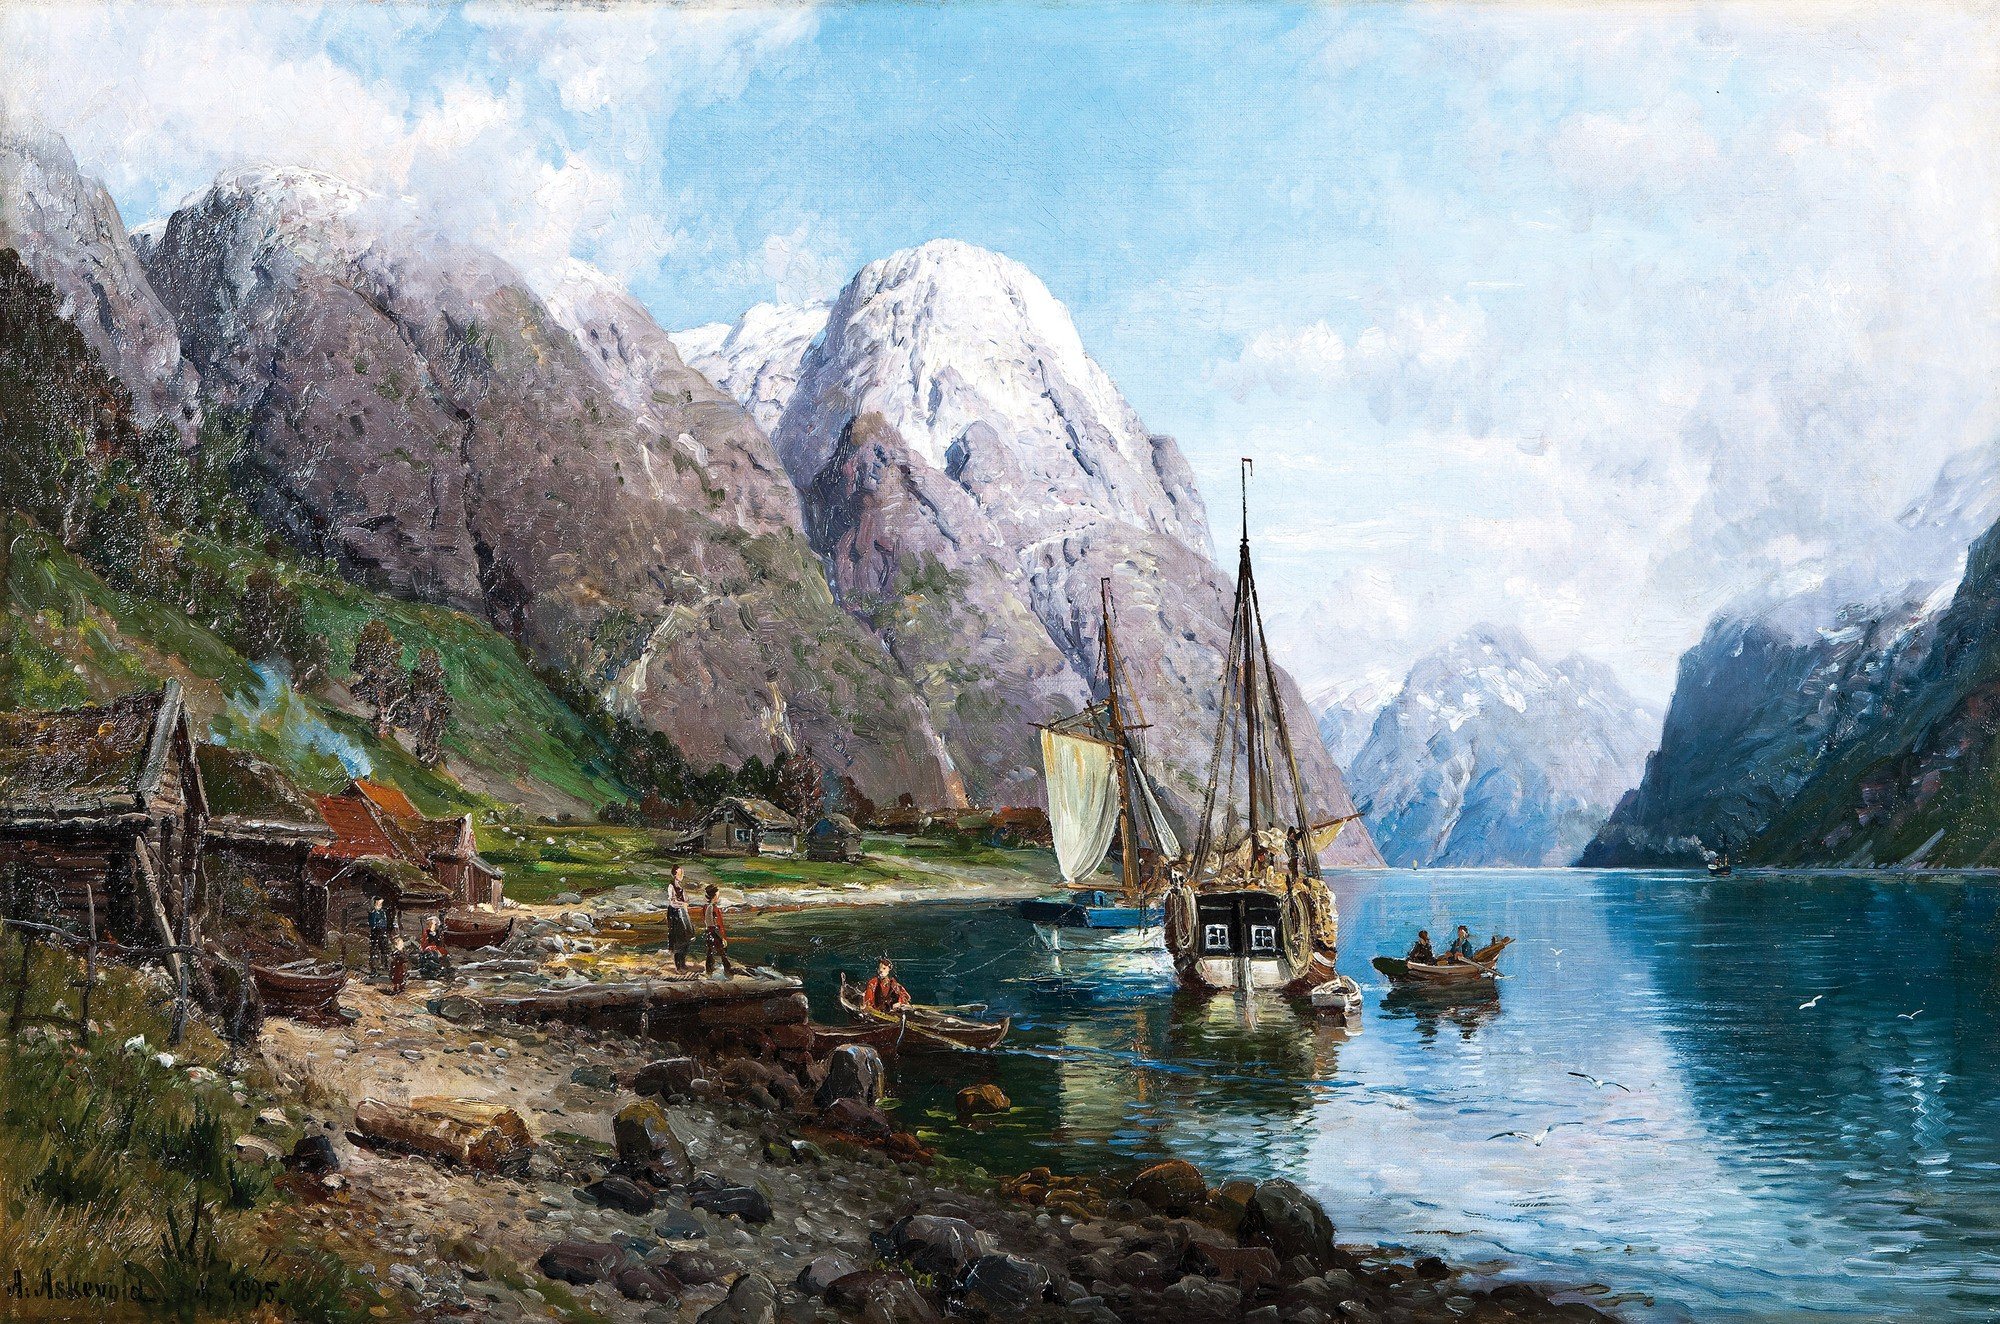 , Artwork, Painting, Classic, Art, Traditional, Art, Anders, Askevold, Norway, Nature, Landscape, Ship, Sailing, Ship, Boat, Mountains, Lake, House, Clouds, People, Snowy, Peak Wallpaper